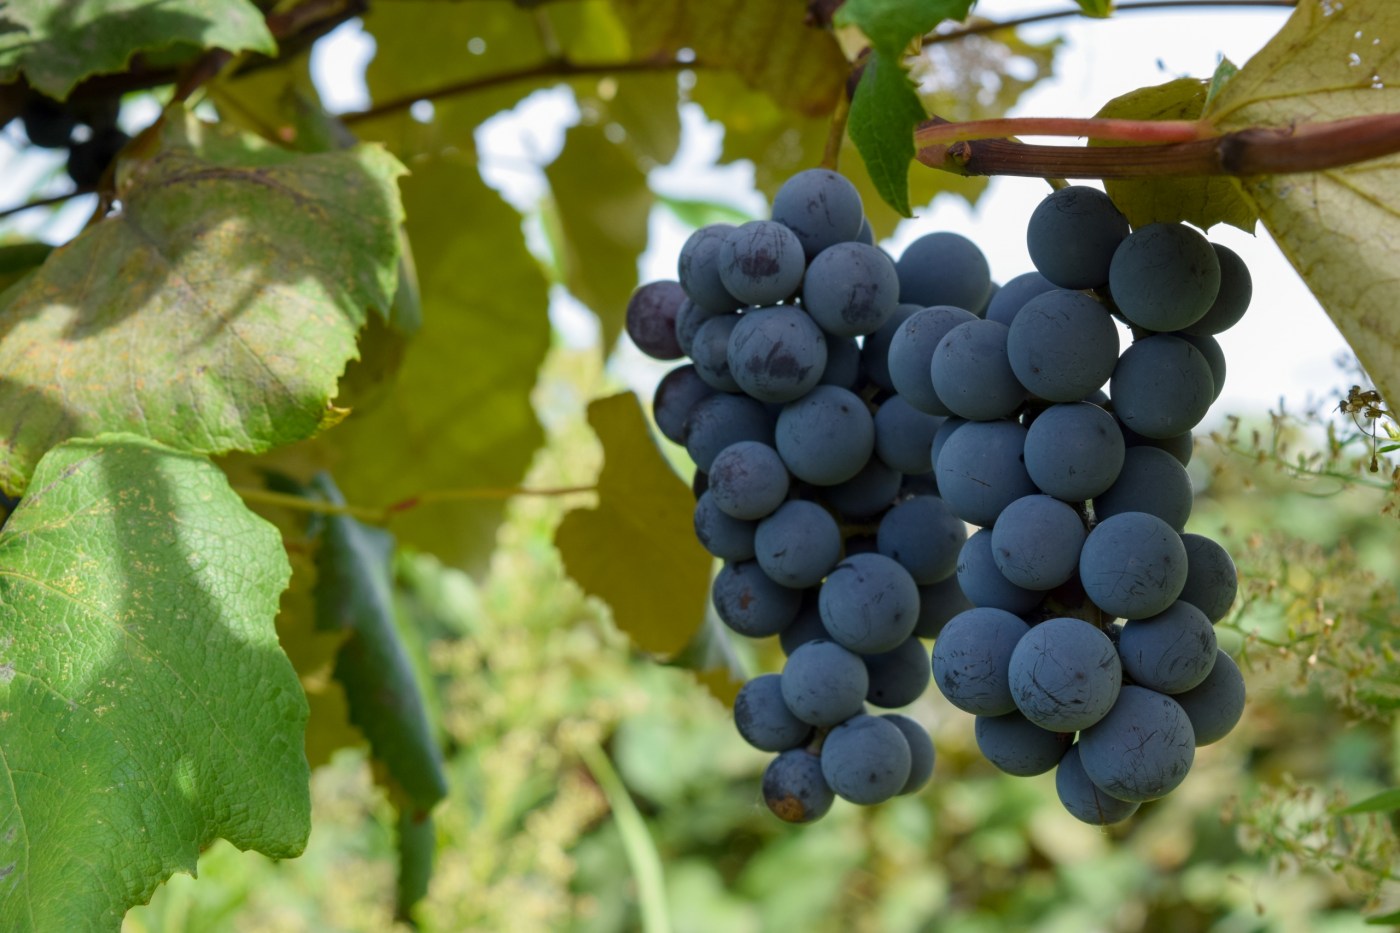 Concord grape juice has gained interest as a therapy due to its high concentration of polyphenols, molecules that have an antioxidant effect in the body. Studies have shown that some polyphenols in grape juice can potentially have a benefit in the brain.